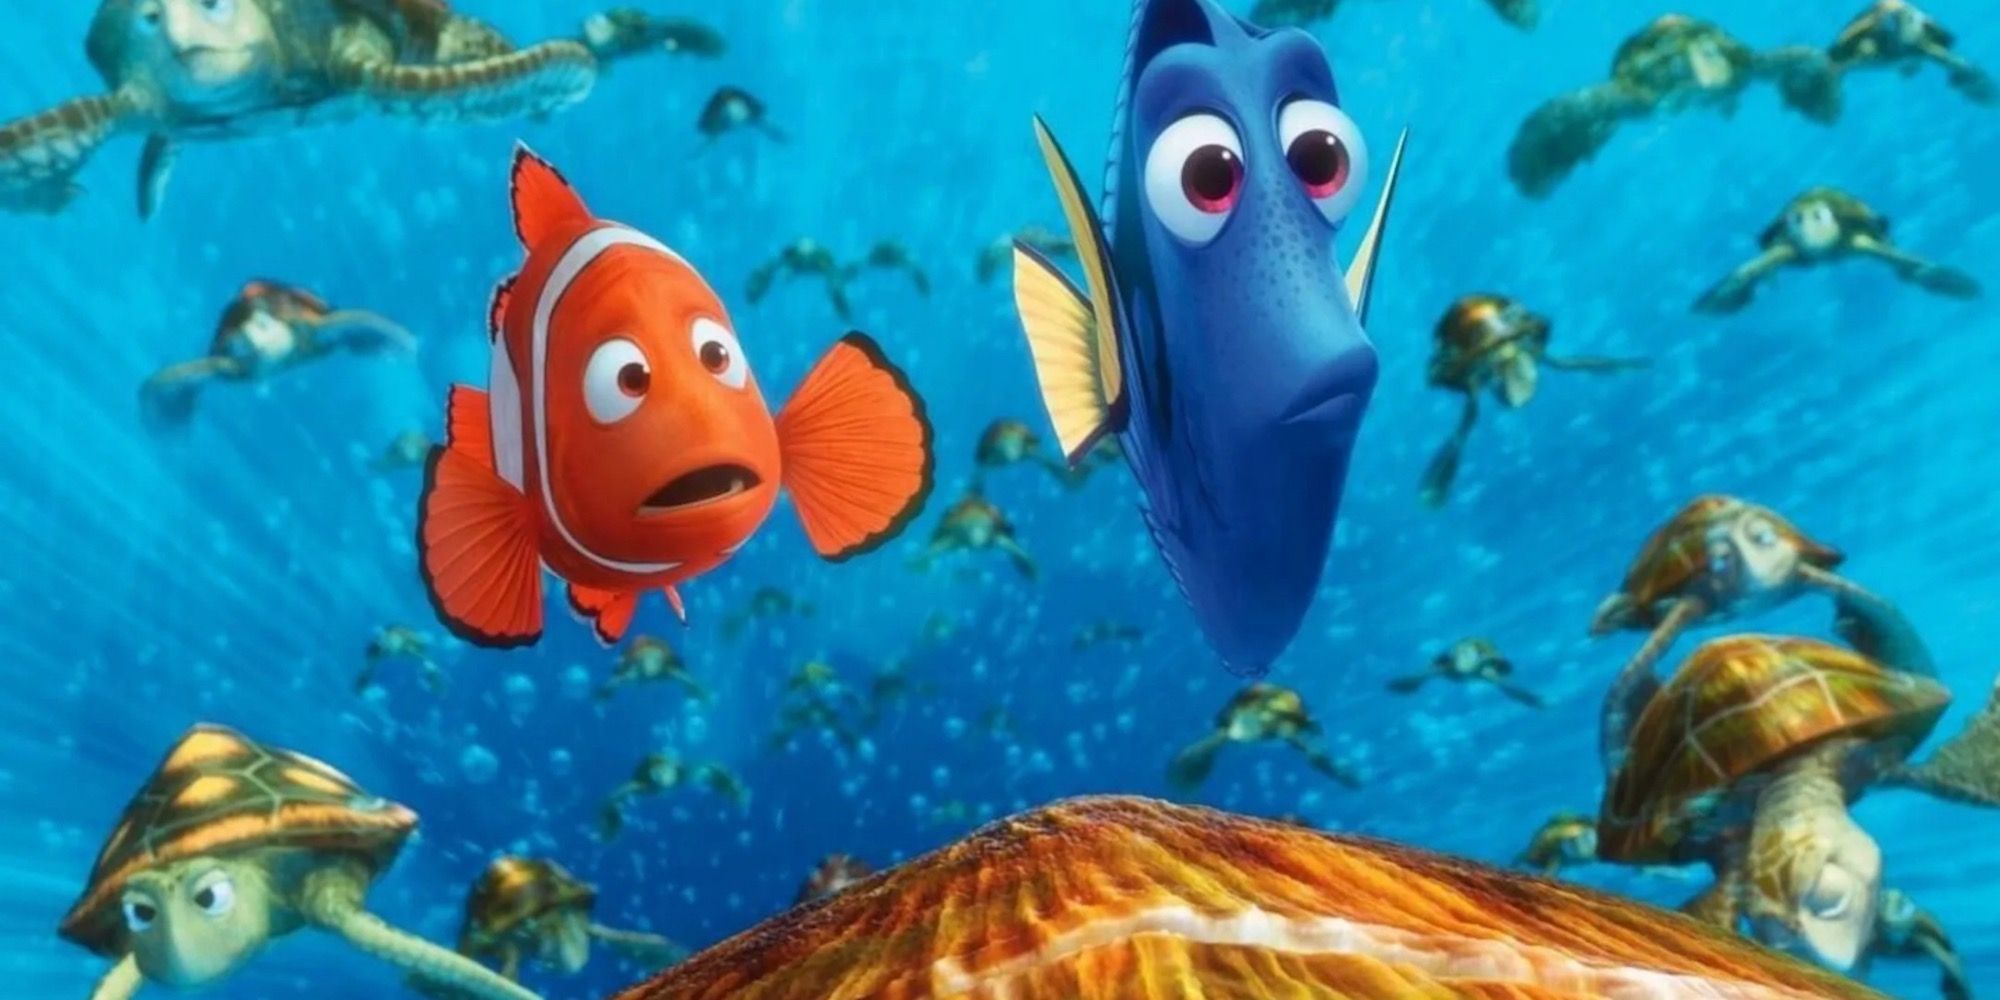 A scene with characters from Finding Nemo